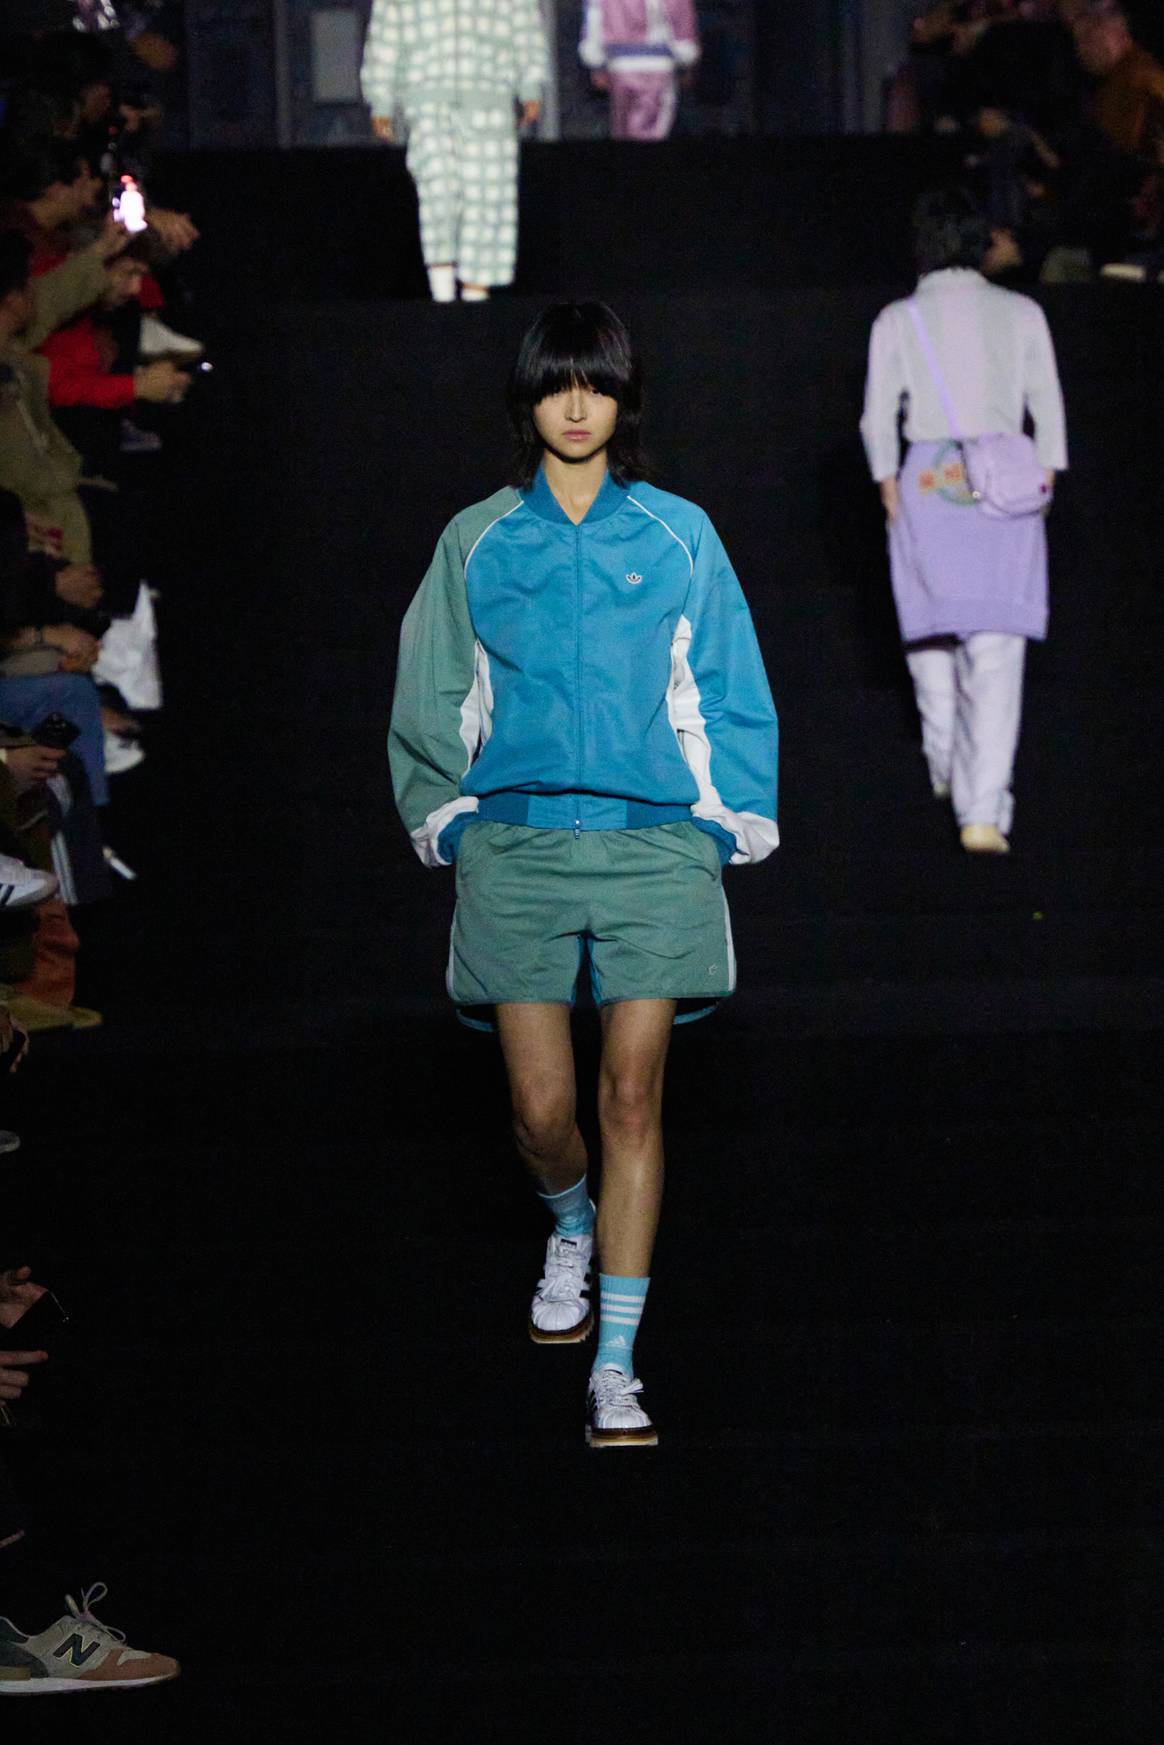 Adidas Originals by Edison Chen ‘Change the Generation’ collection at CLOT’s spring/summer 2024 show during Shanghai Fashion Week